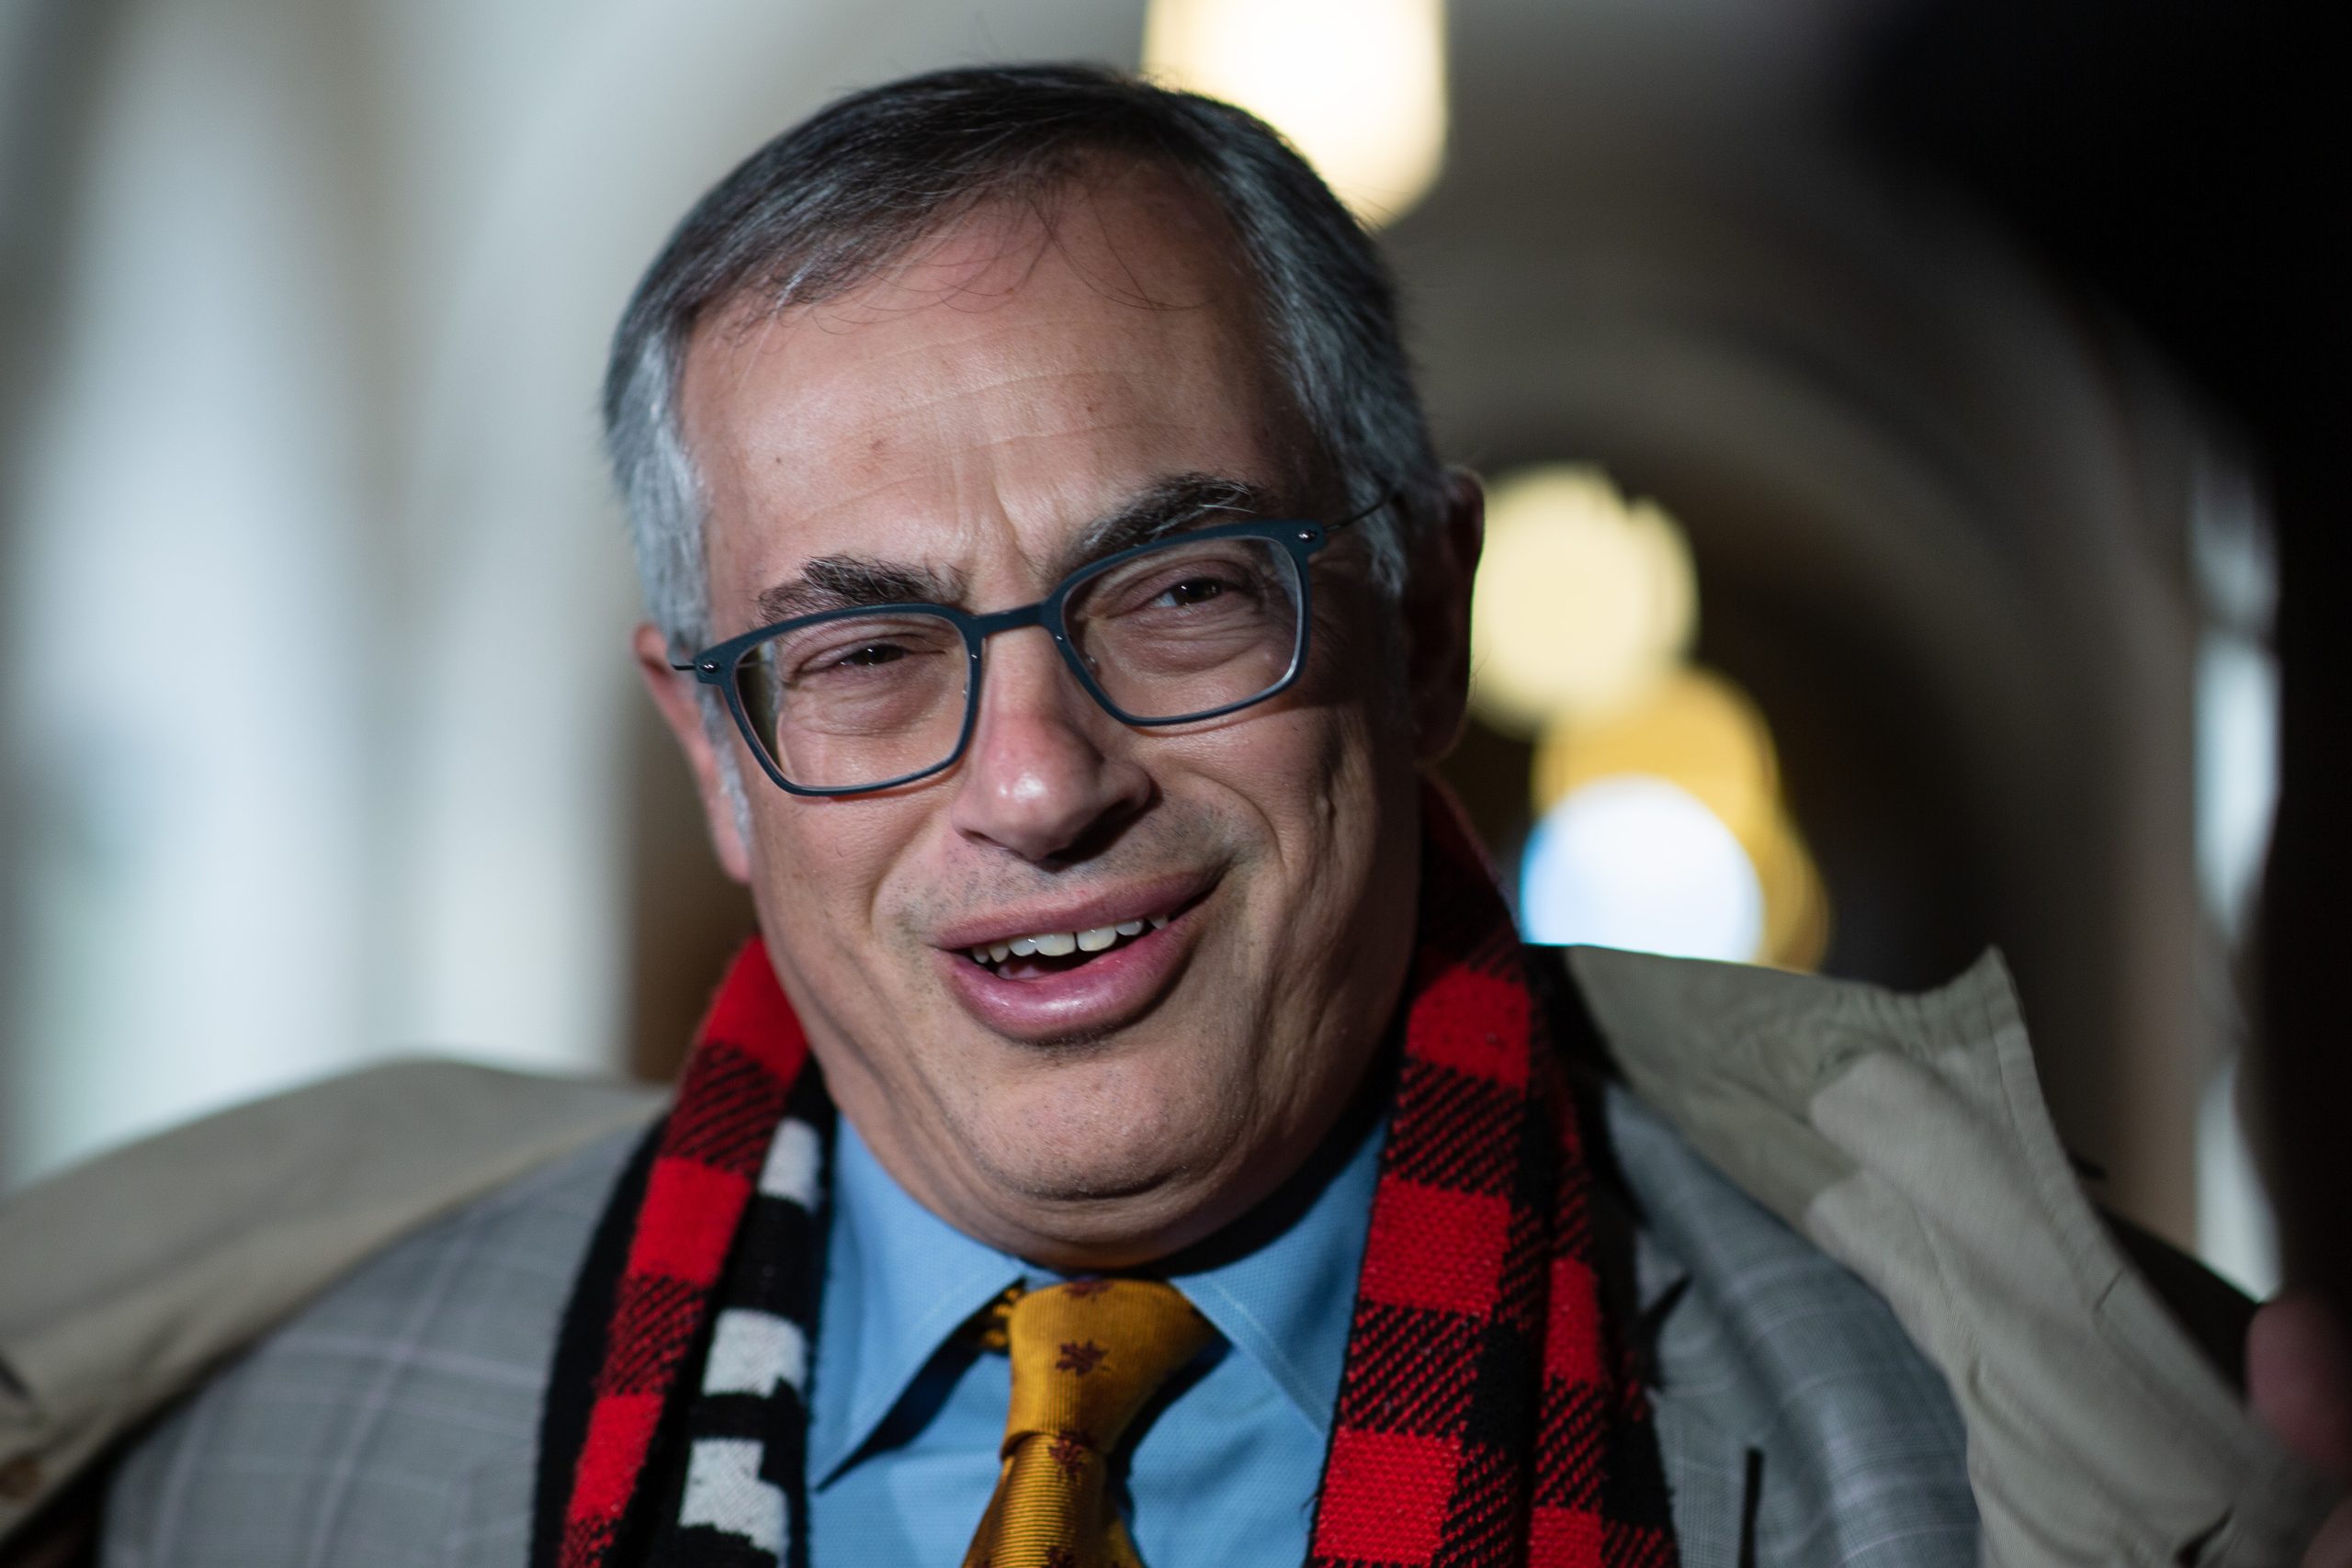 Clement quits Conservative shadow cabinet after sharing explicit photos, video